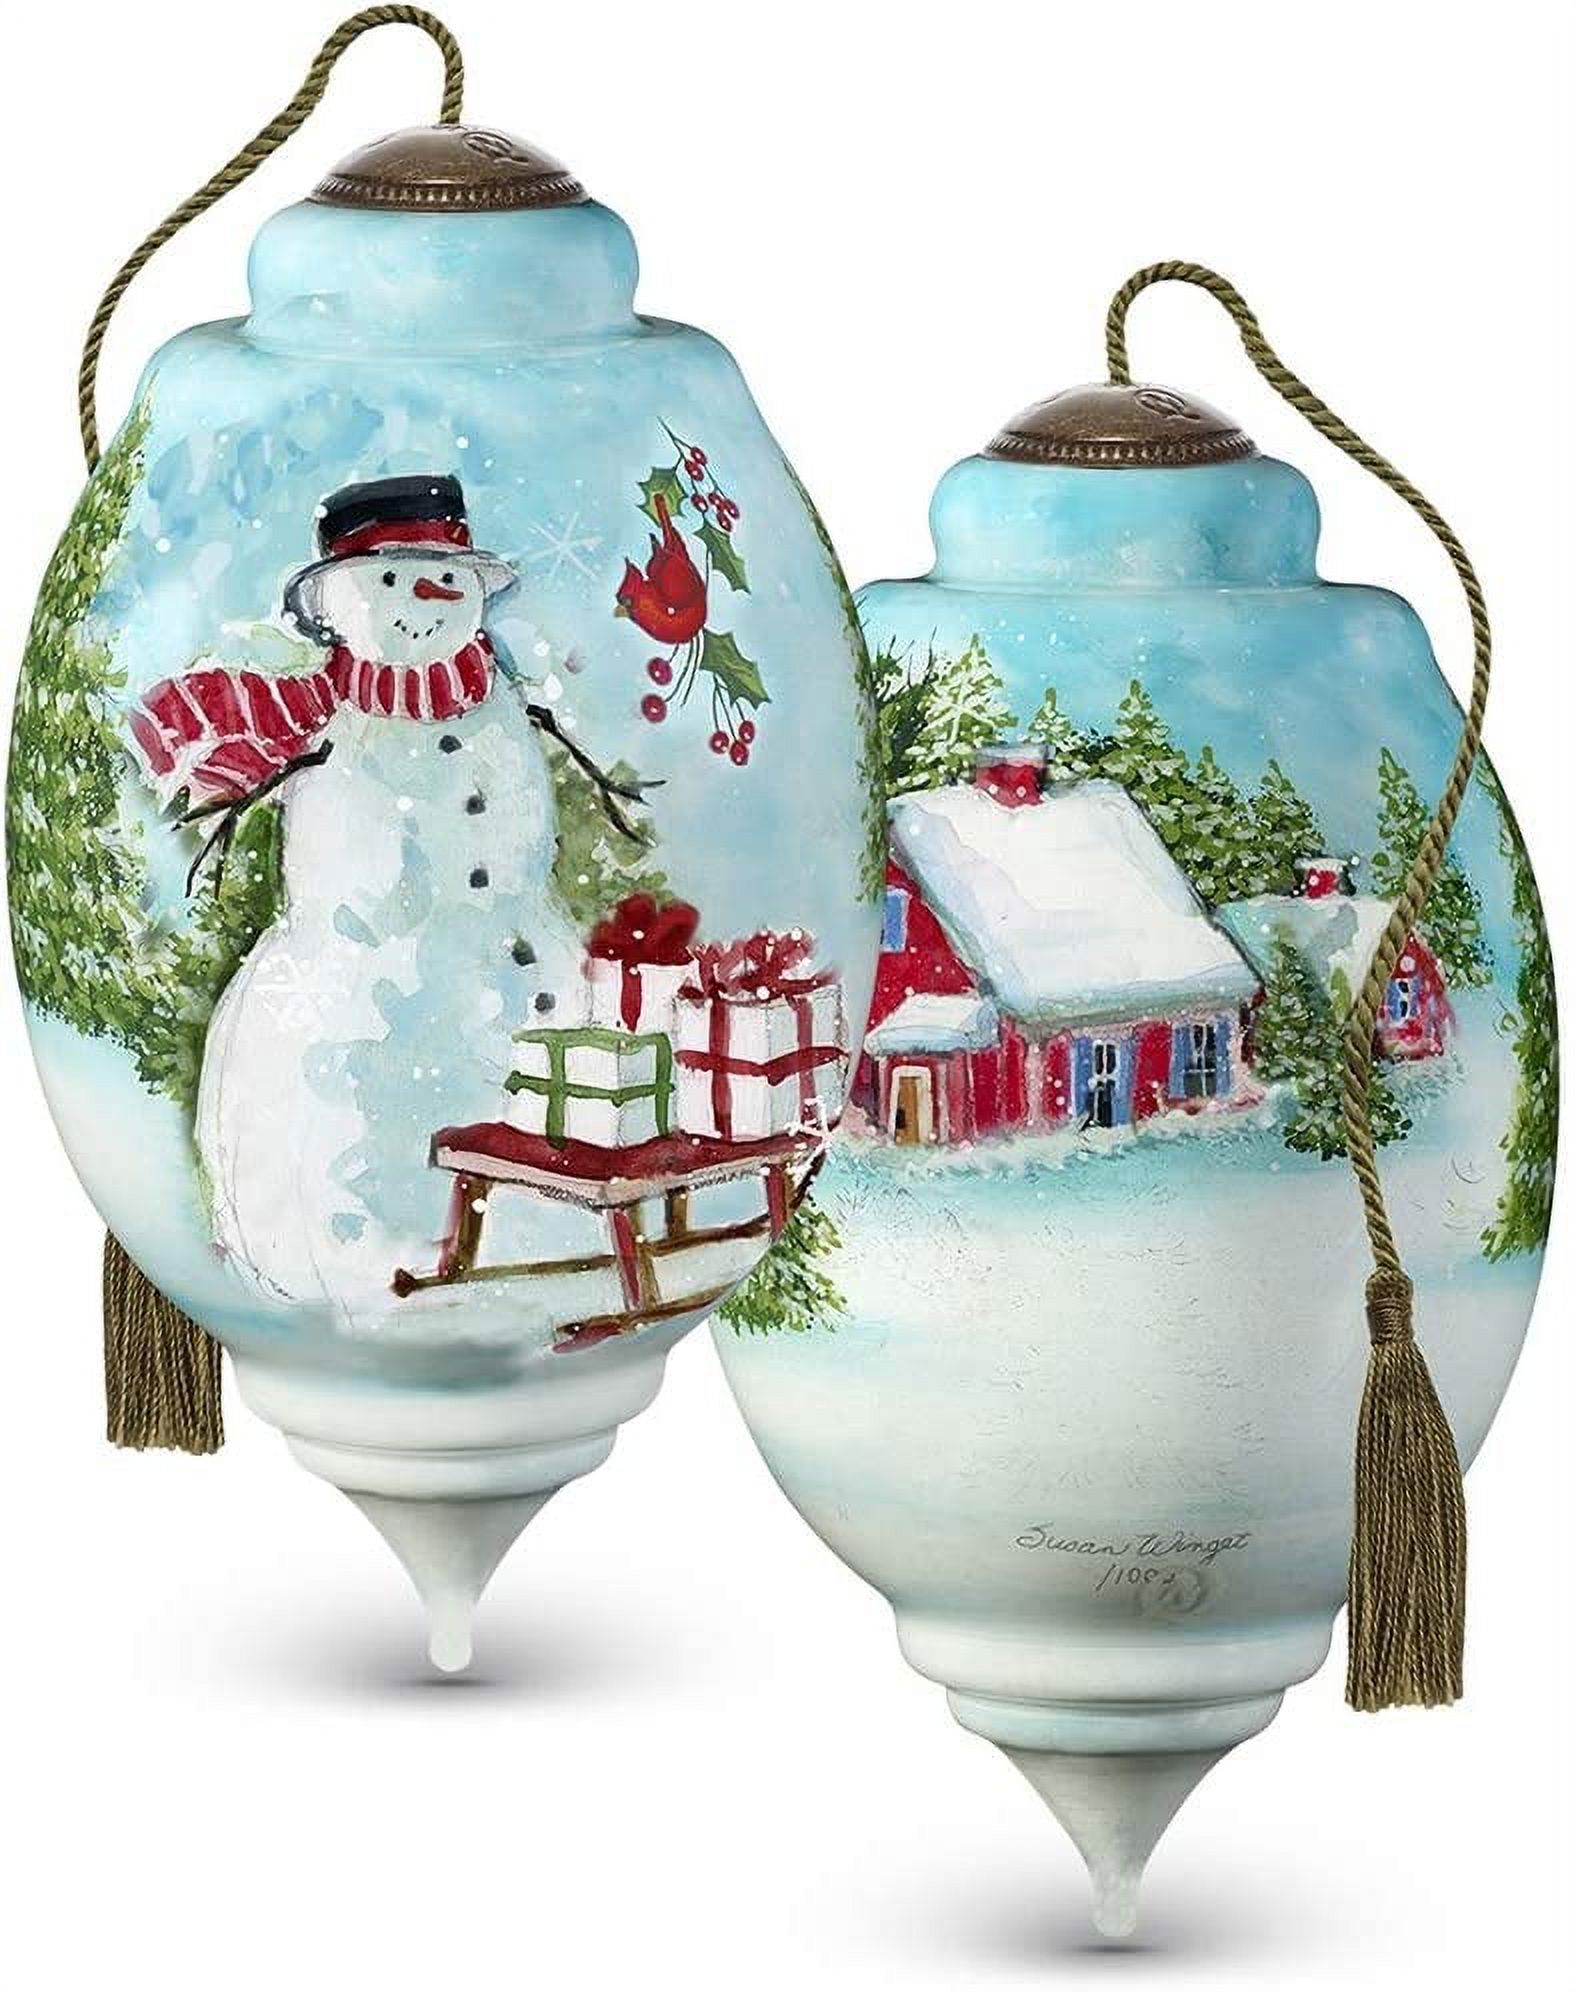 Ne'Qwa Limited Edition Wintery House and Snowman in Woods Ornament #7201103 - image 3 of 5